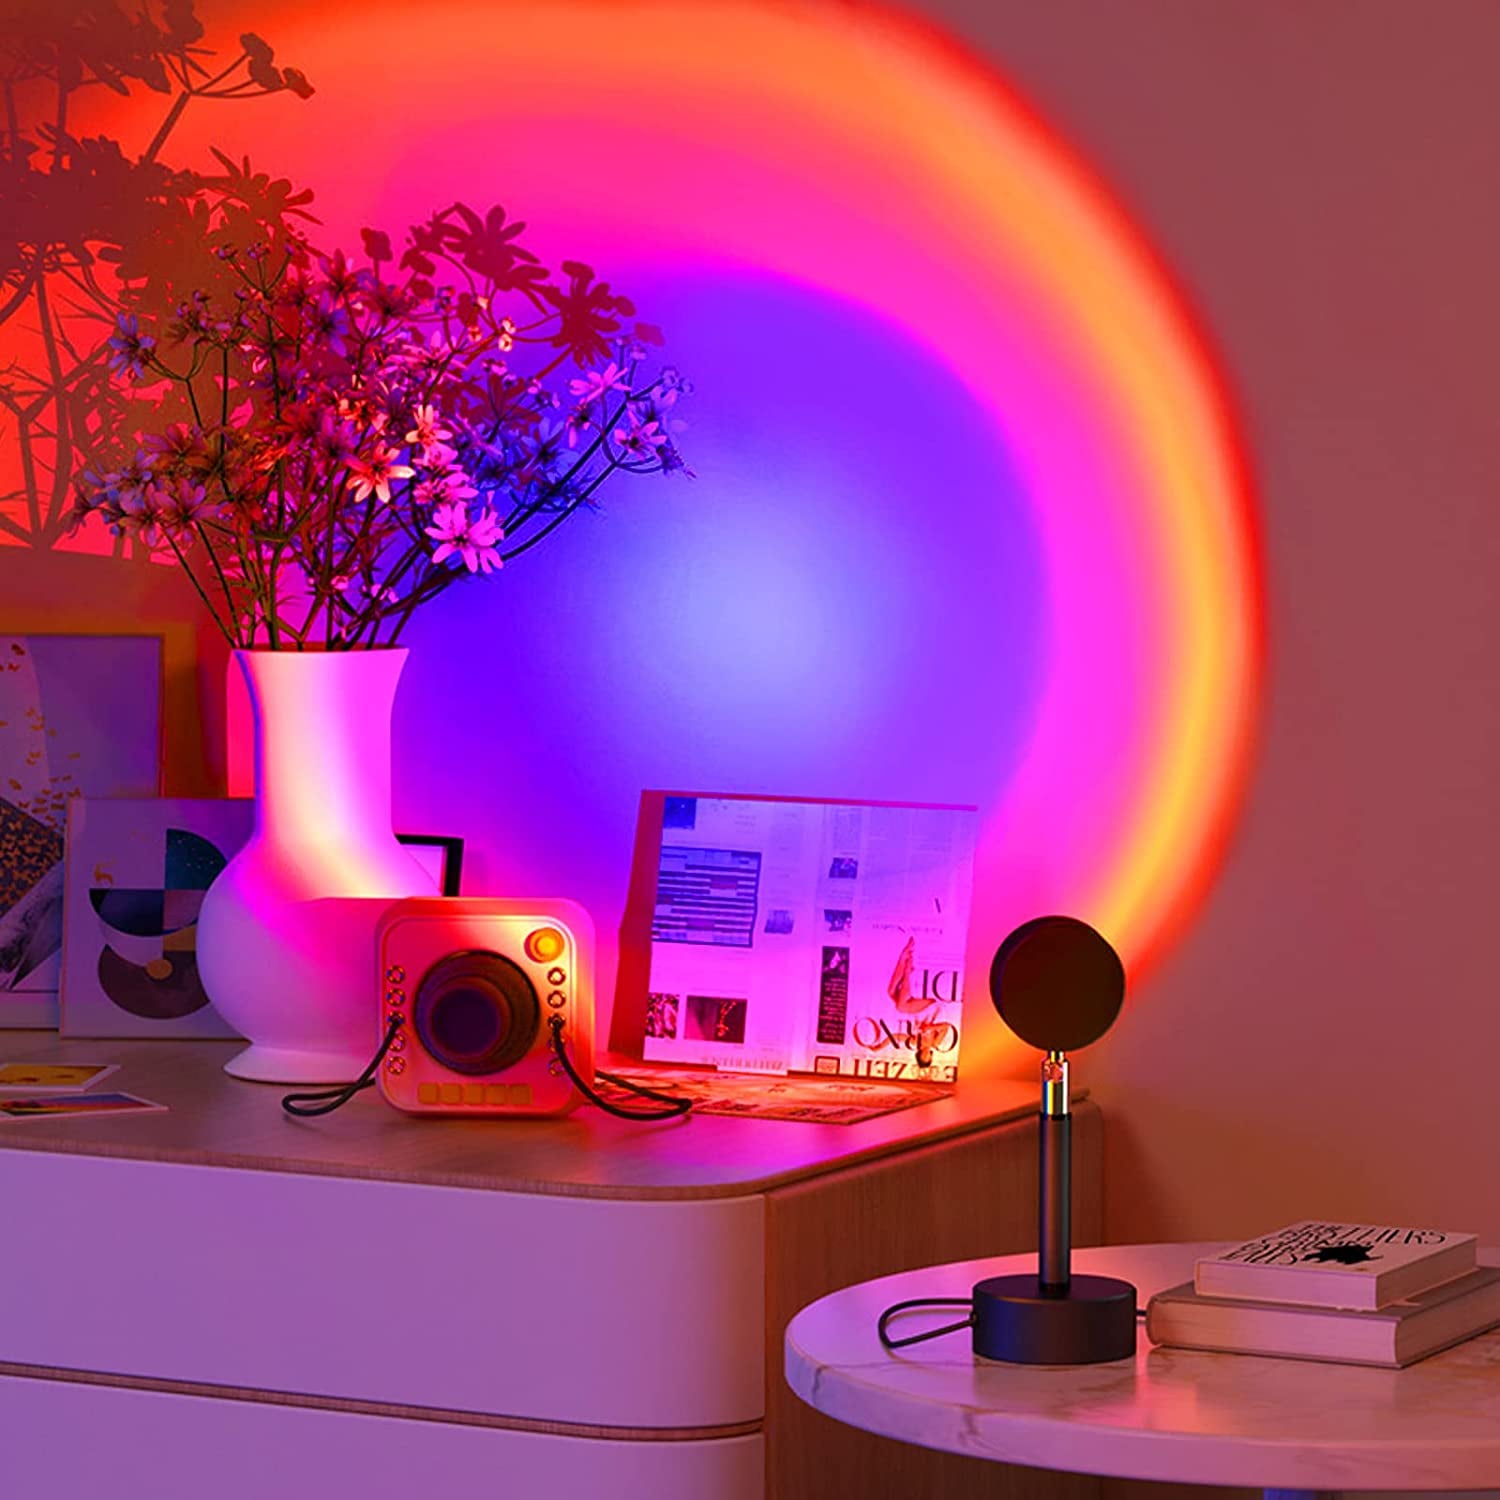 CIRCA Magazine  Cool Gadgets For Every Room In The House